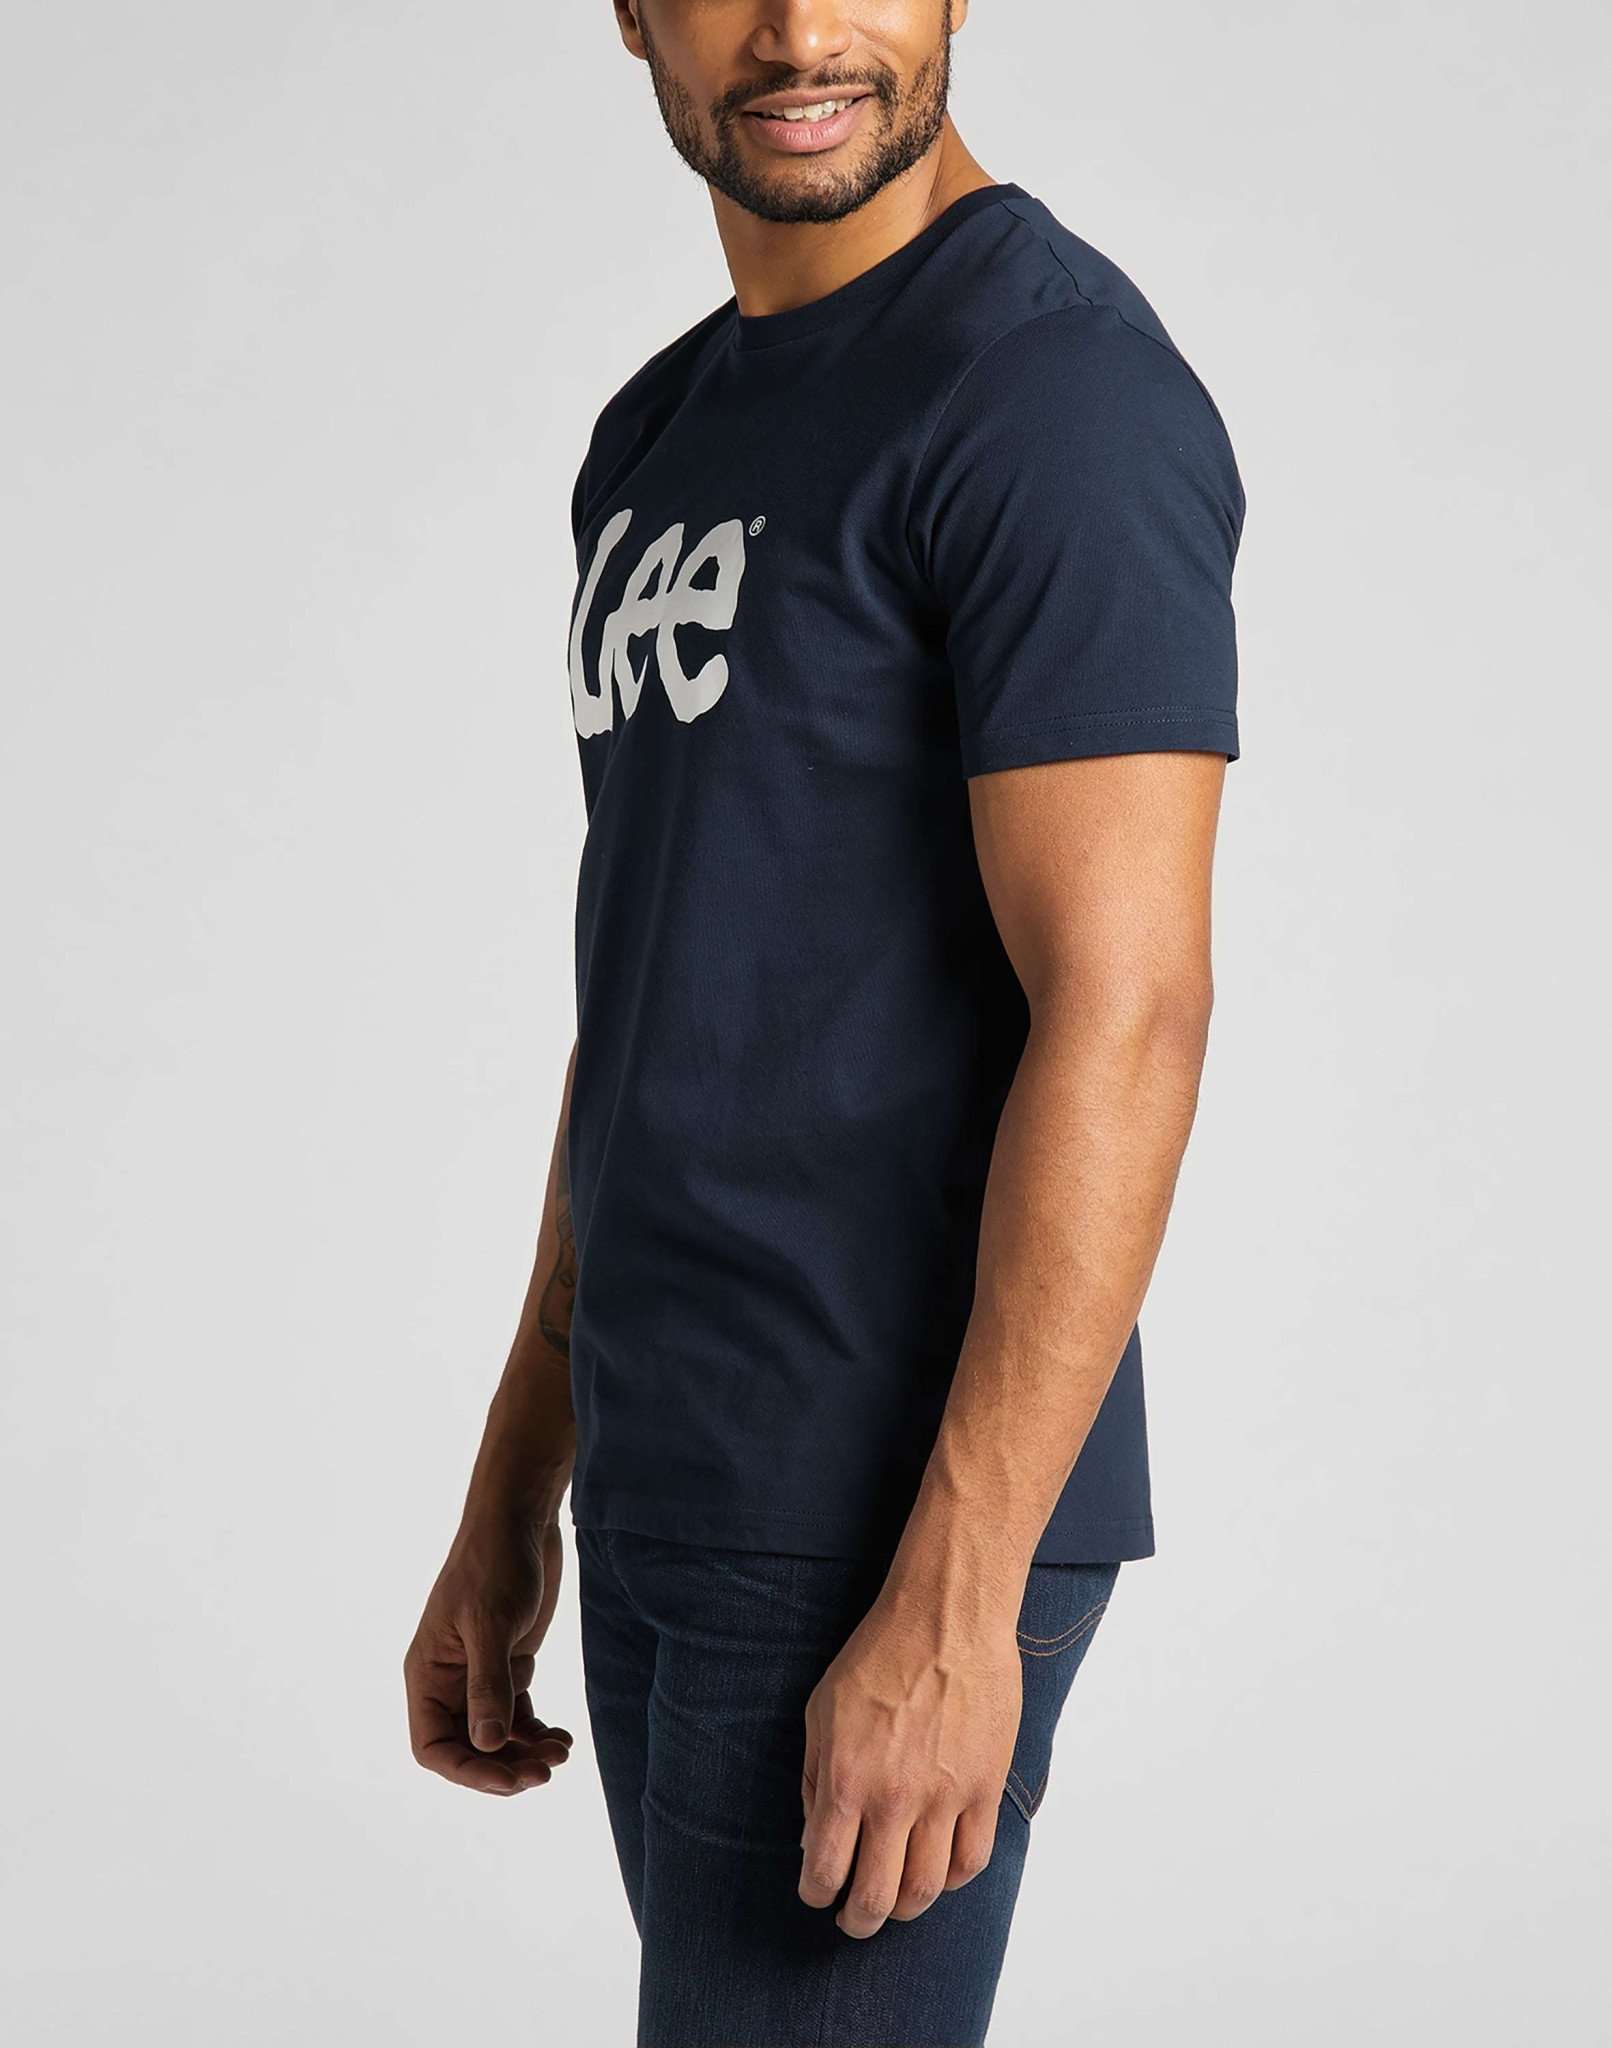 Wobbly Logo Tee in Navy T-Shirts Lee   